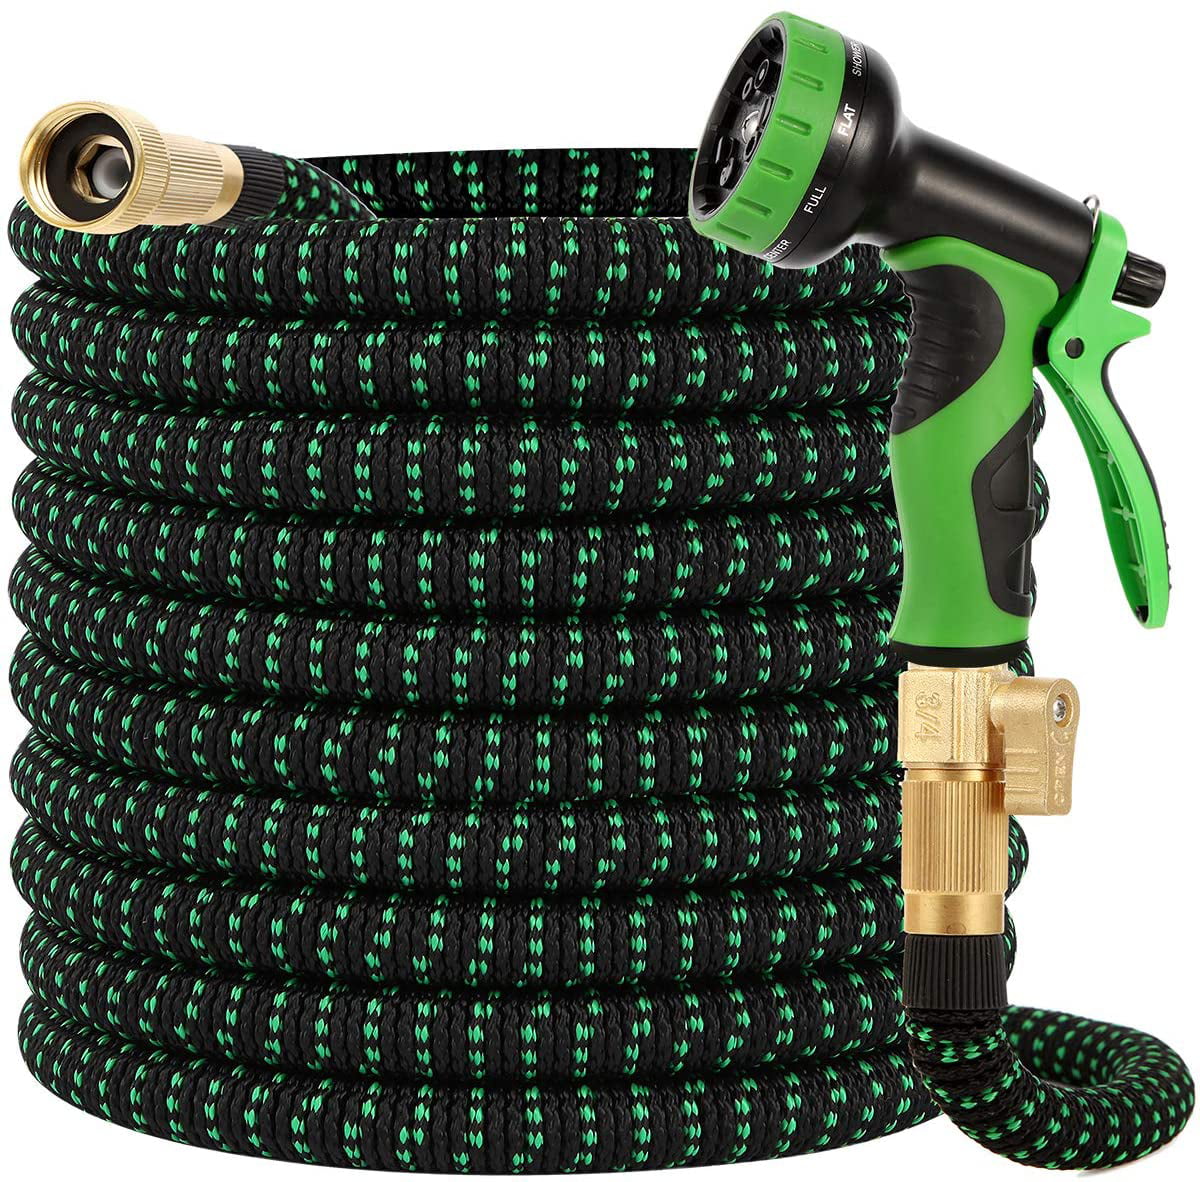 Mayner Flexible Garden Hose Pipe Blue 7 Pattern Water Hose Nozzle Idea for All Your Watering Needs 100 FT 30m Expandable Garden Watering Hose with Superior Strength 3750D Fabric 3-Layers Latex 